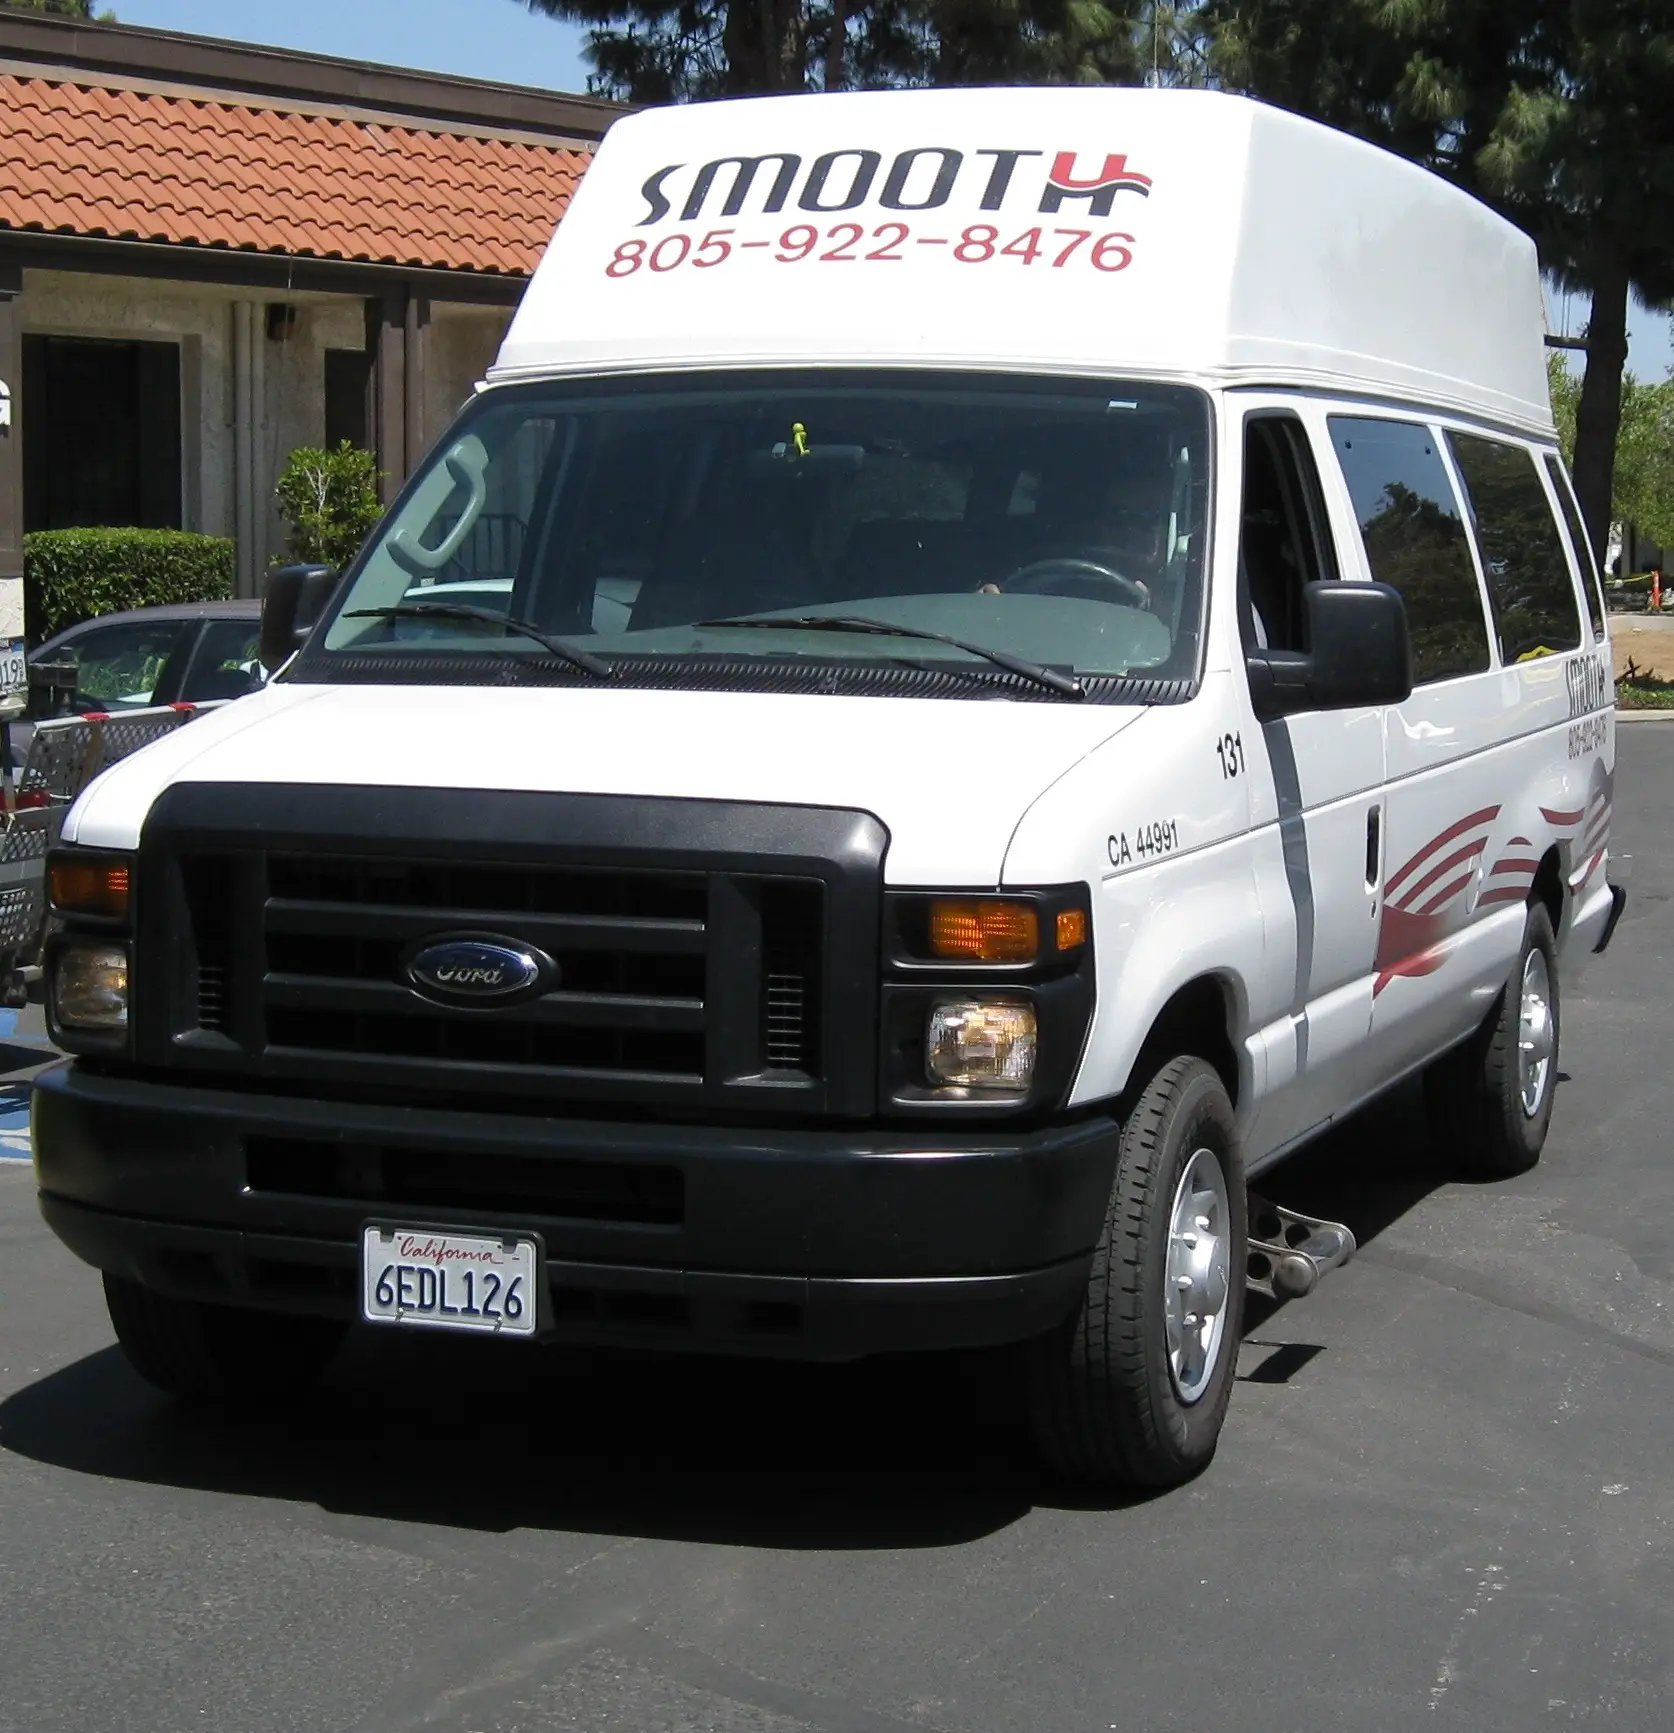 Transportation For Medicare Patients In California